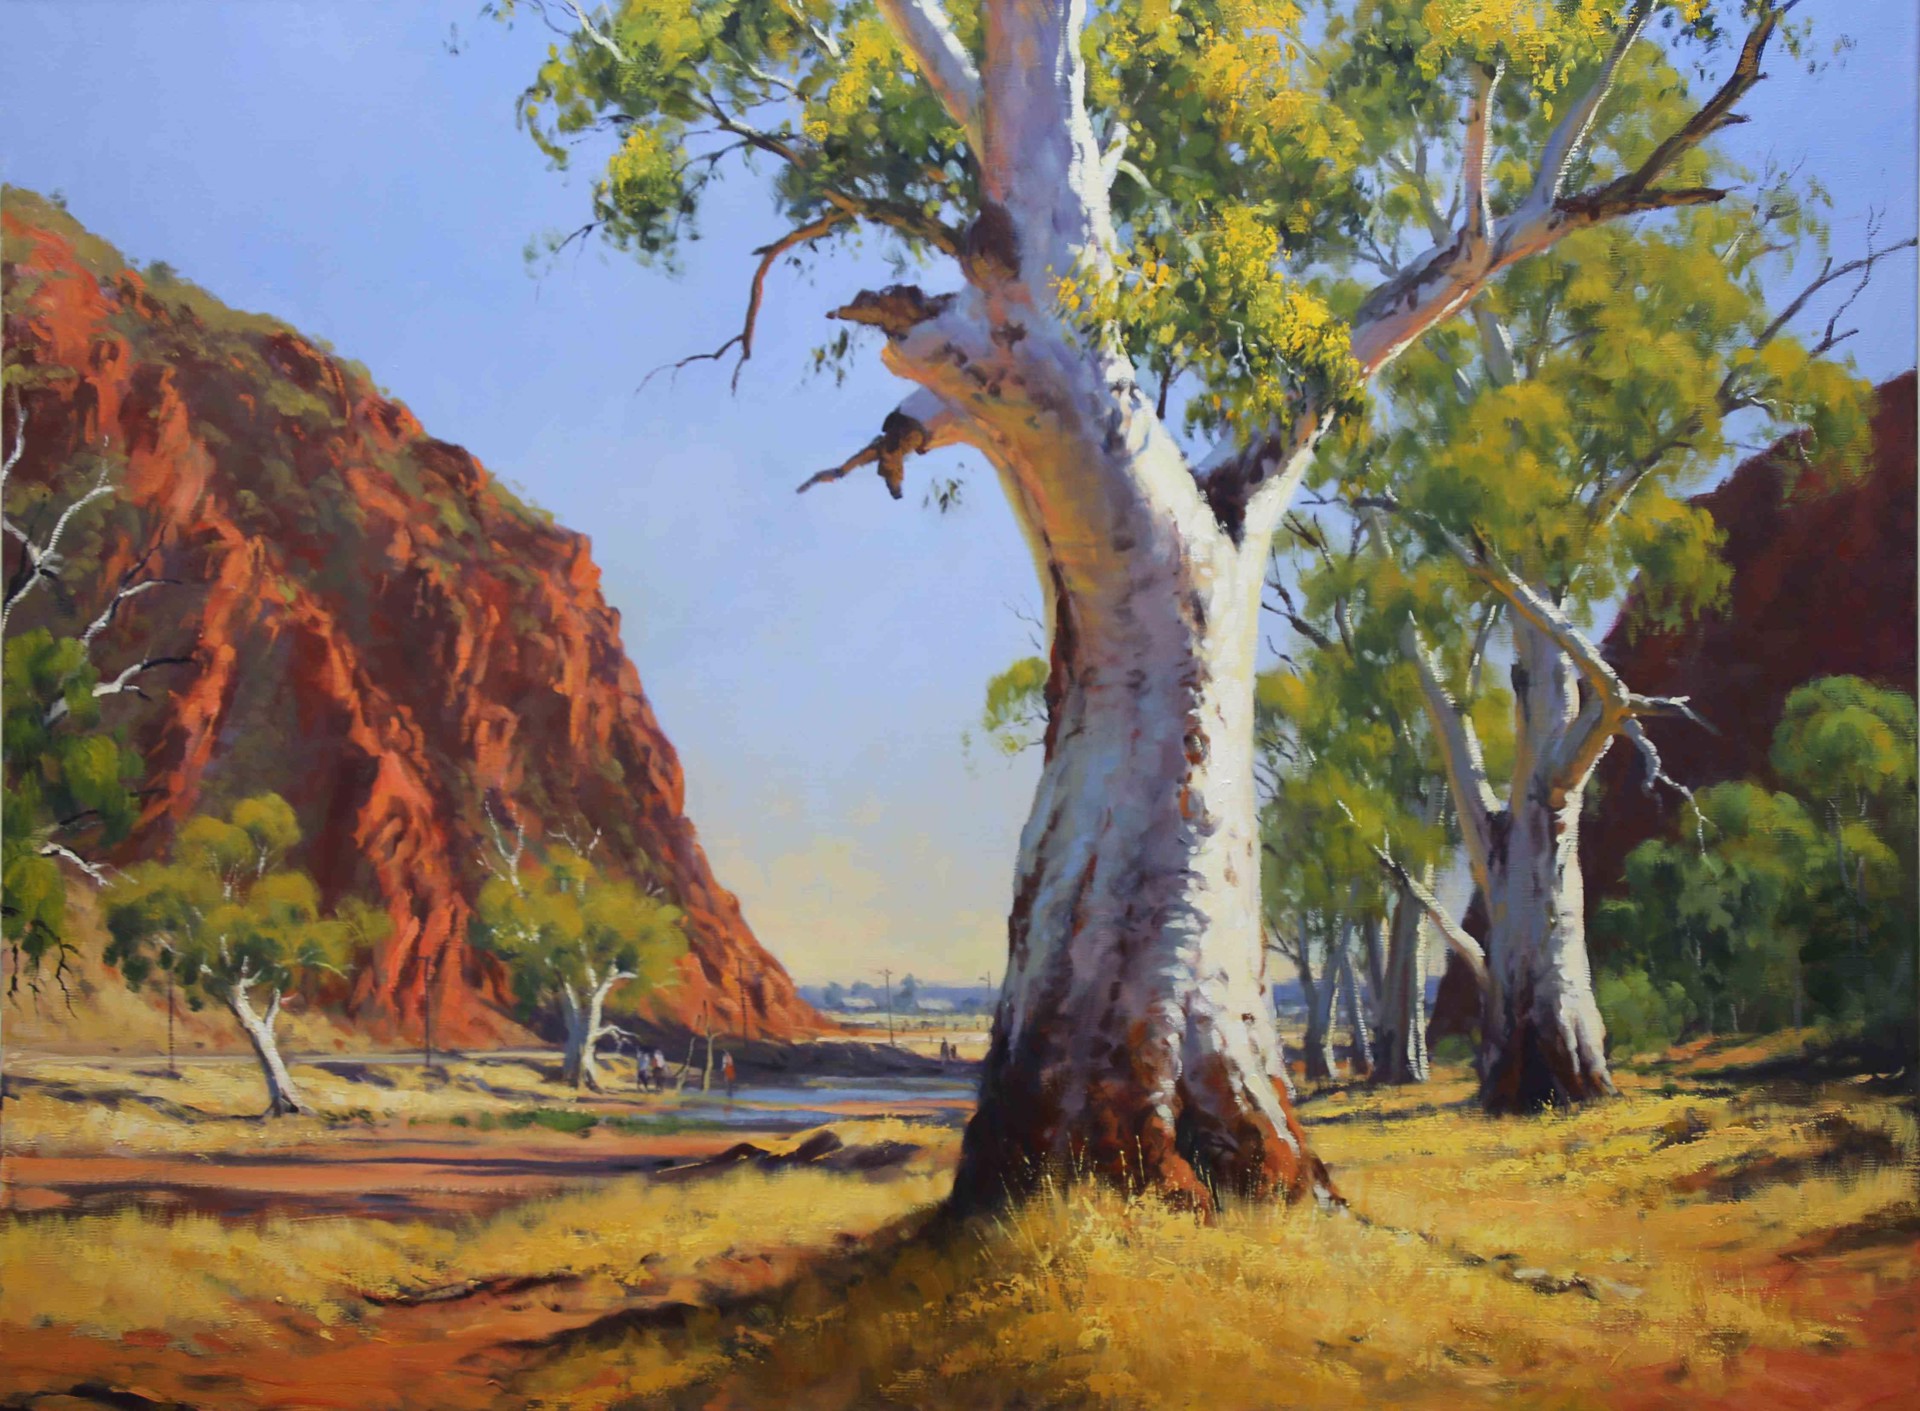 Entering Alice Springs by Ted Lewis